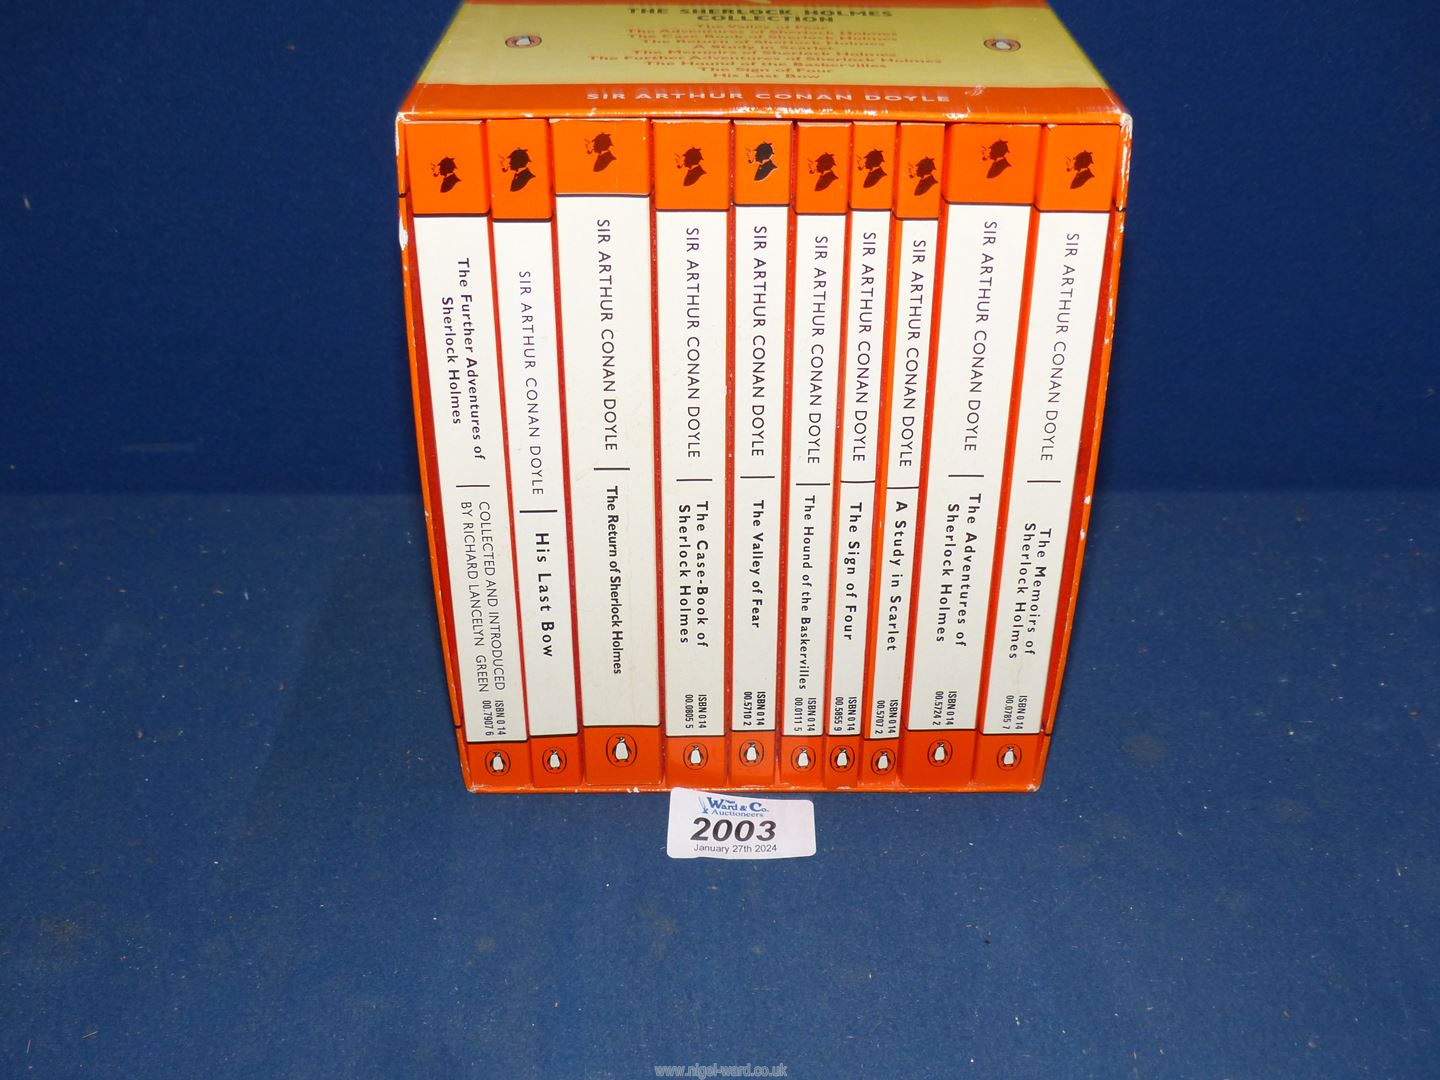 A boxed set of Penguin books by Sir Arthur Conan Doyle 'The Sherlock Holmes Collection'.